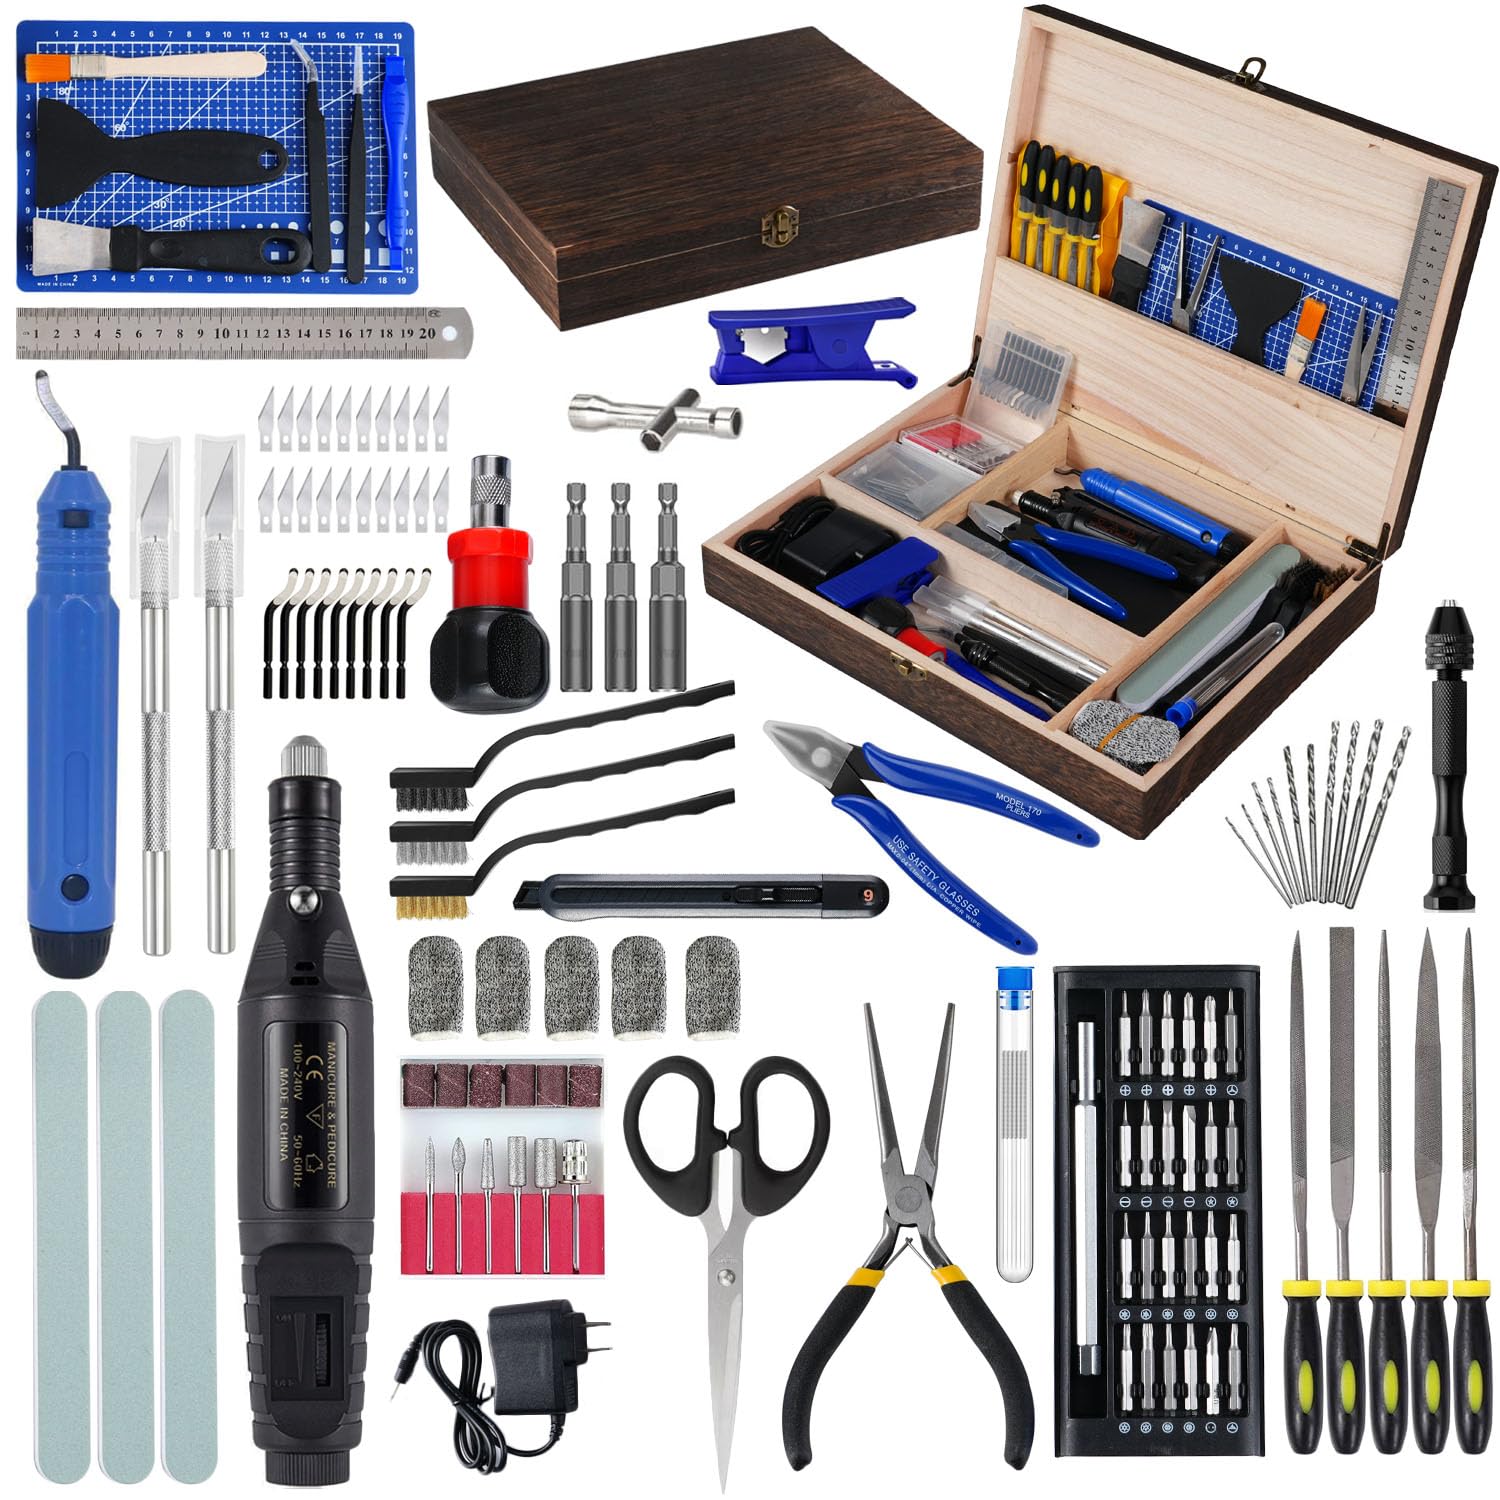 124pcs-3d-printing-accessory-tools-with-tool-bag-for-3d-printer-modeler-basic-tools-diverse-3d-print-nozzle-cleaning-kit-3 124Pcs 3D Printing Accessory Tools Review